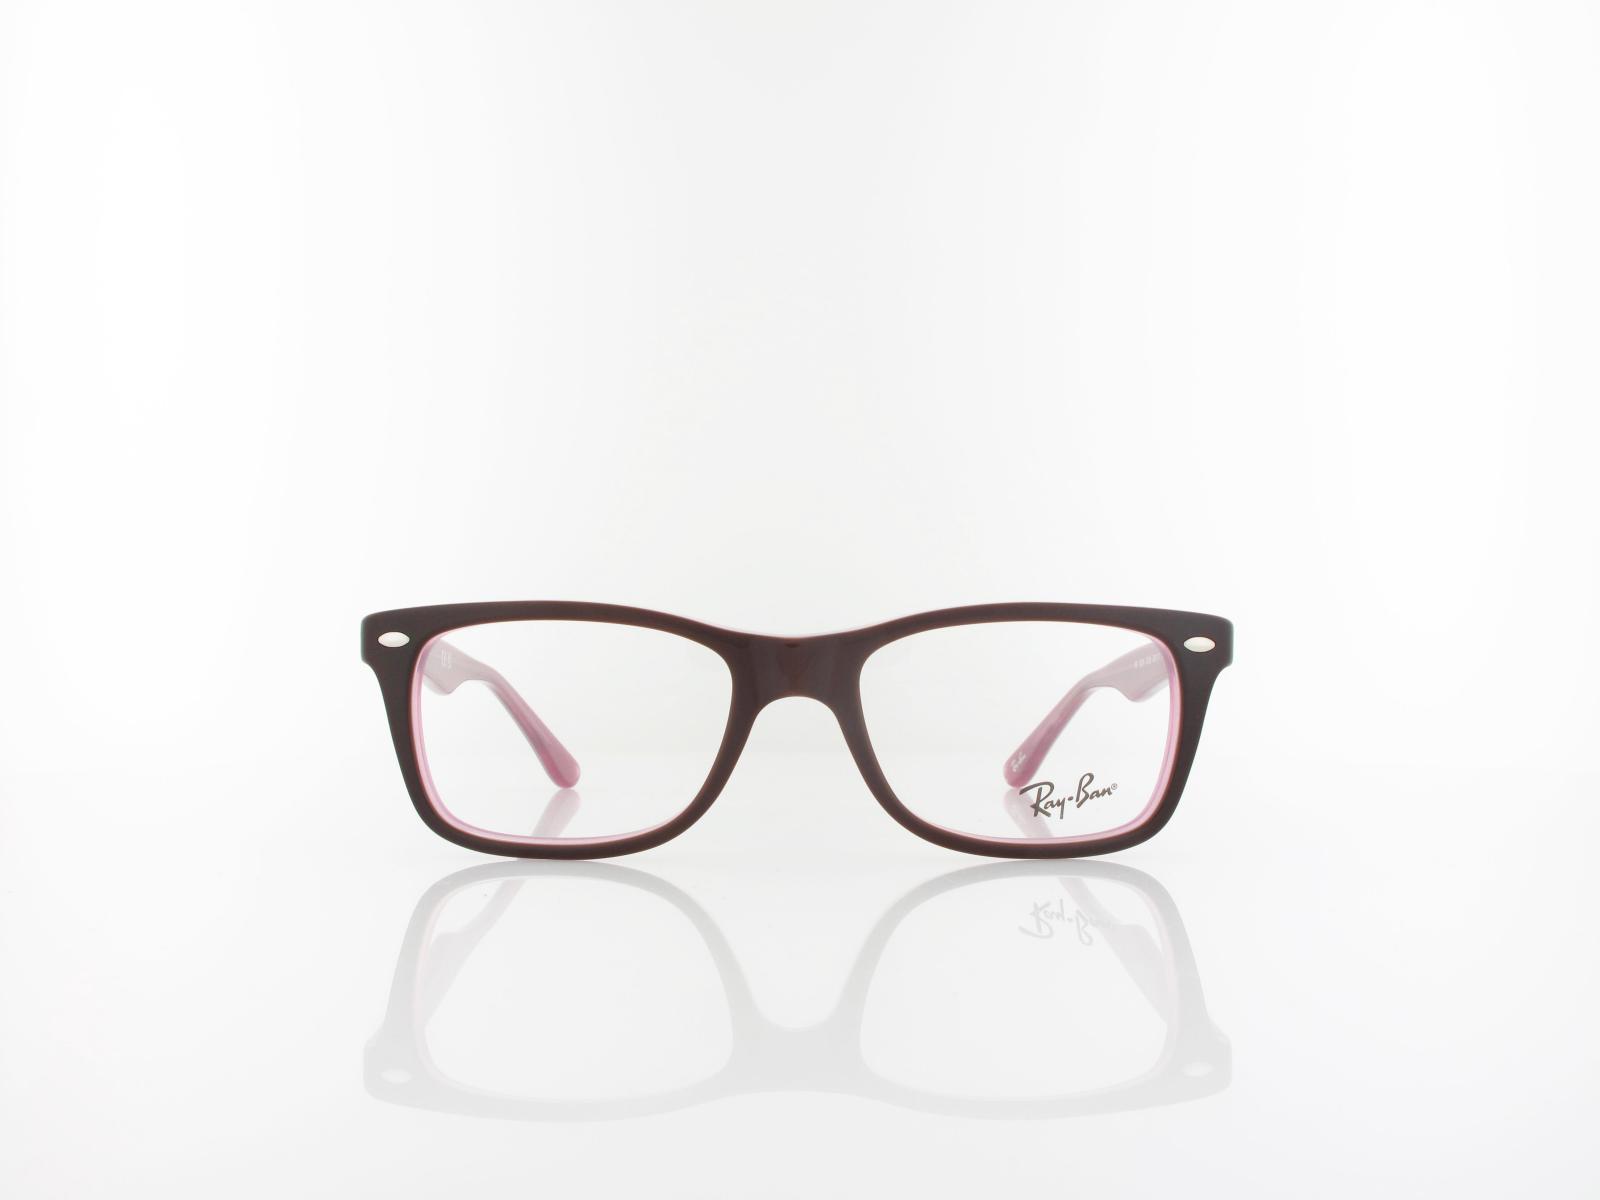 Ray Ban | RX5228 2126 50 | top brown on opal pink